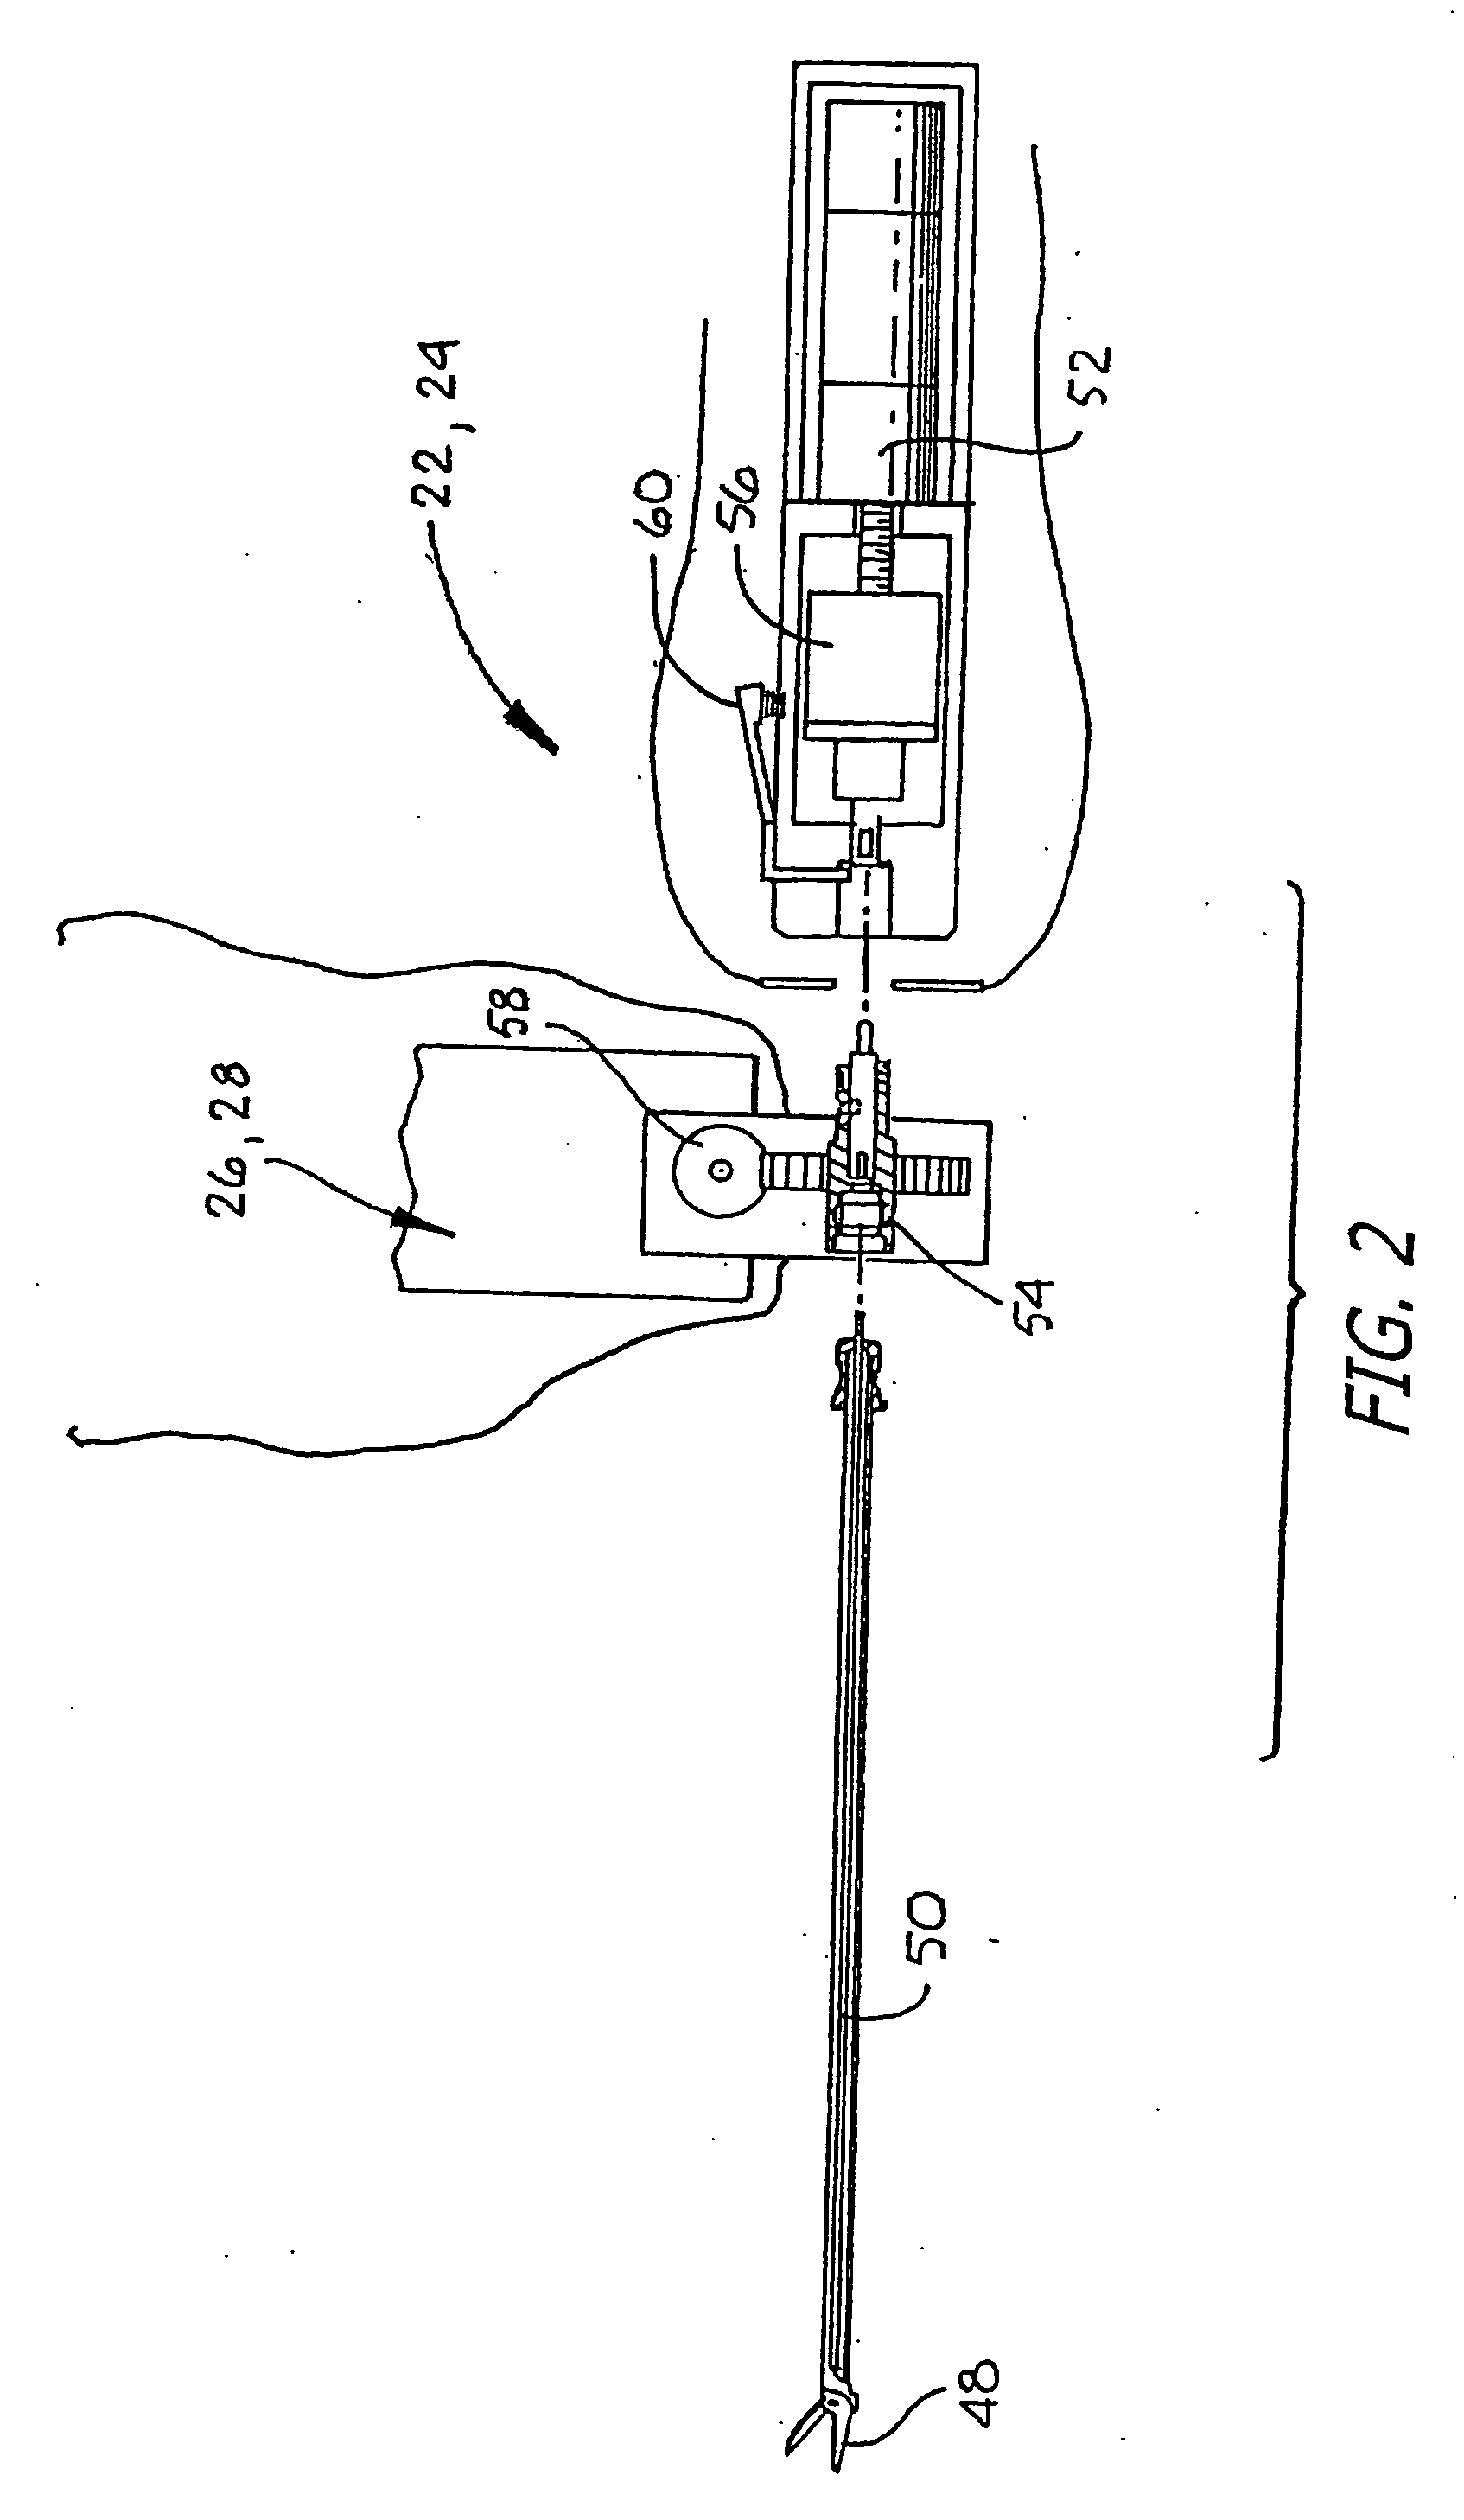 Constraint based control in a minimally invasive surgical apparatus